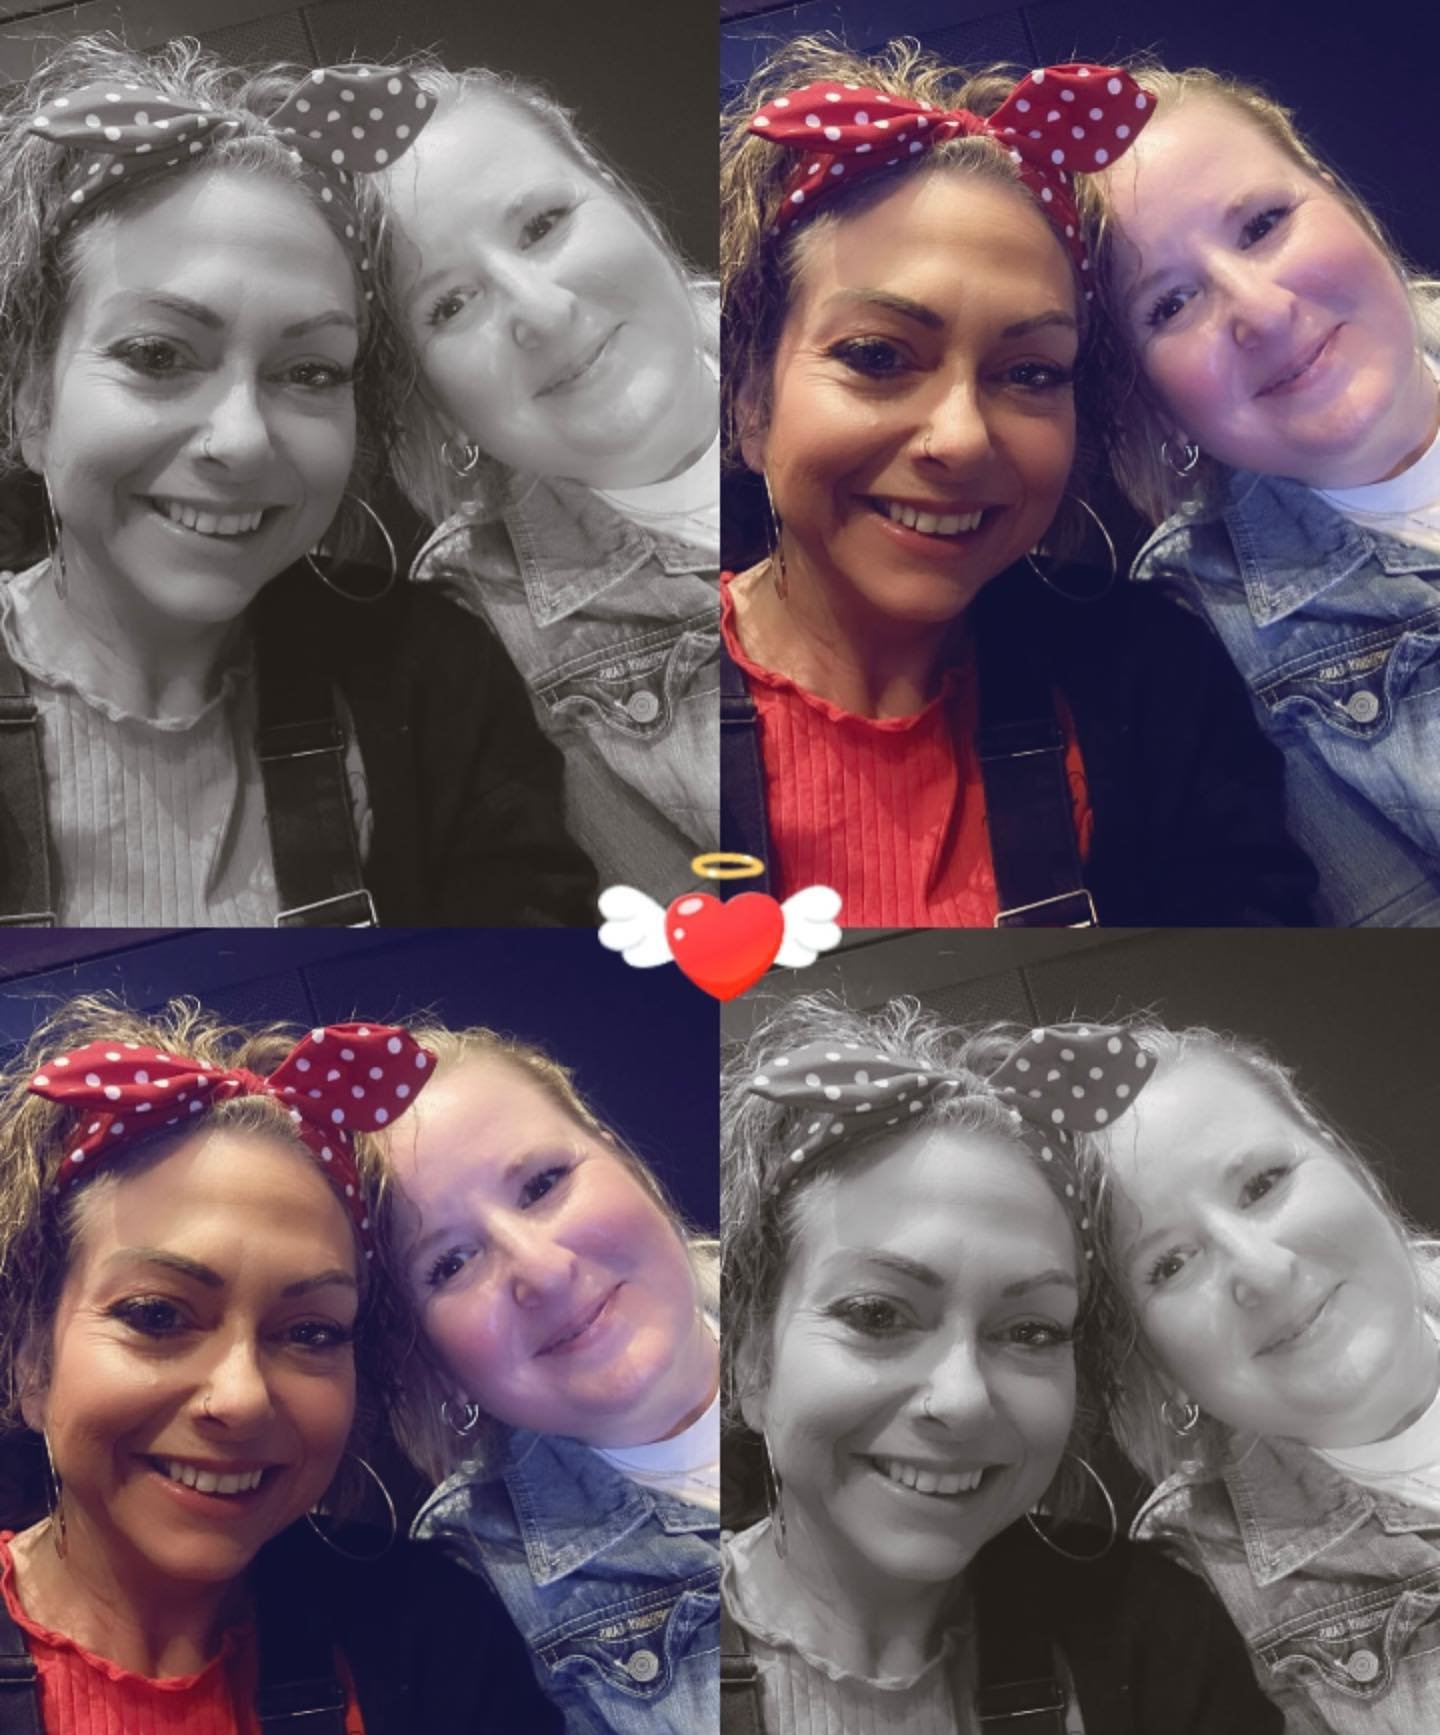 29 years of friendship, nothing we do not know about each other, nothing we wouldn&rsquo;t do for eachother. Love you besty 😘😘😘#besties #bestfriends #friendship #nosecrets